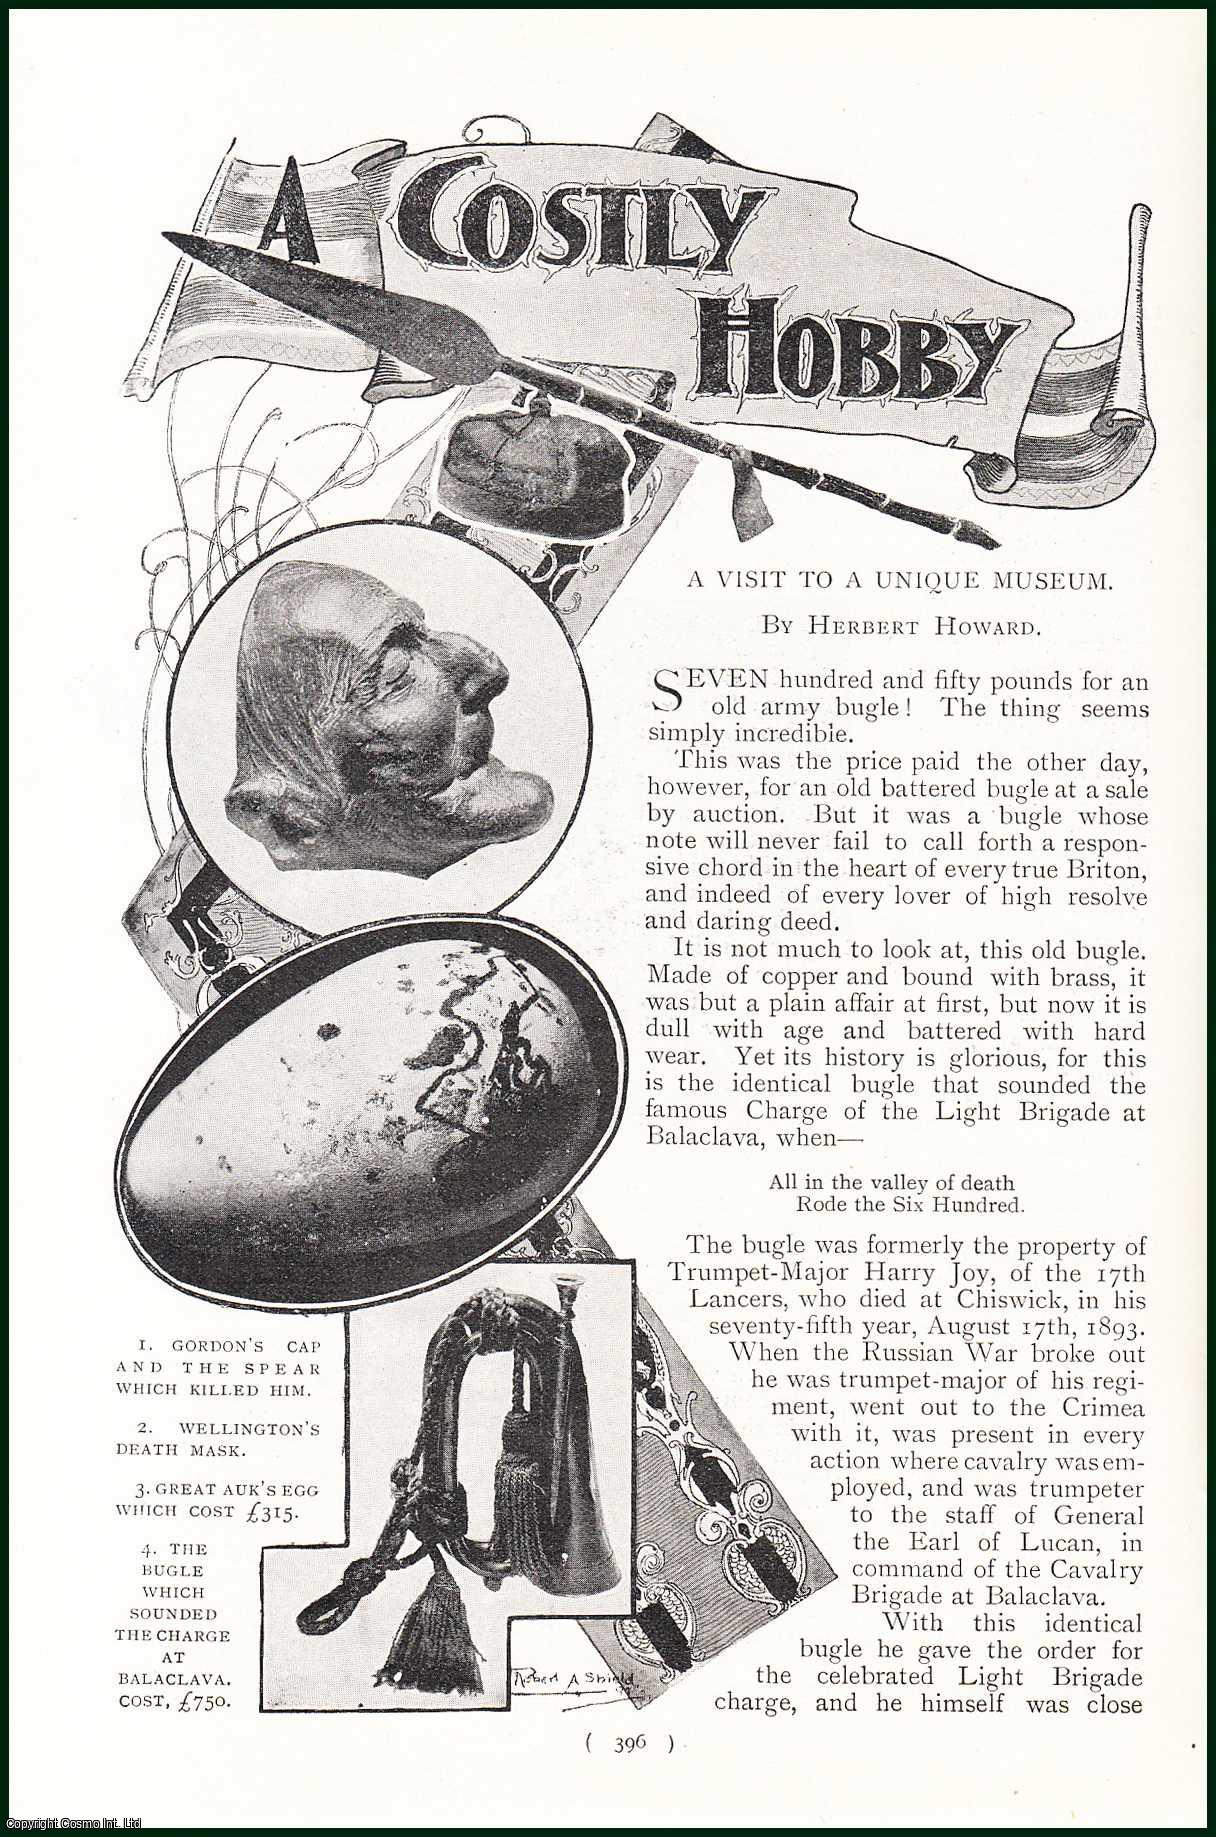 Herbert Howard - A Costly Hobby. A Visit to a Museum. An Interesting Hobby of a Mr. T.G. Middlebrook of The Edington Castle Hotel, Mornington Rd, London. An uncommon original article from the Harmsworth London Magazine, 1900.